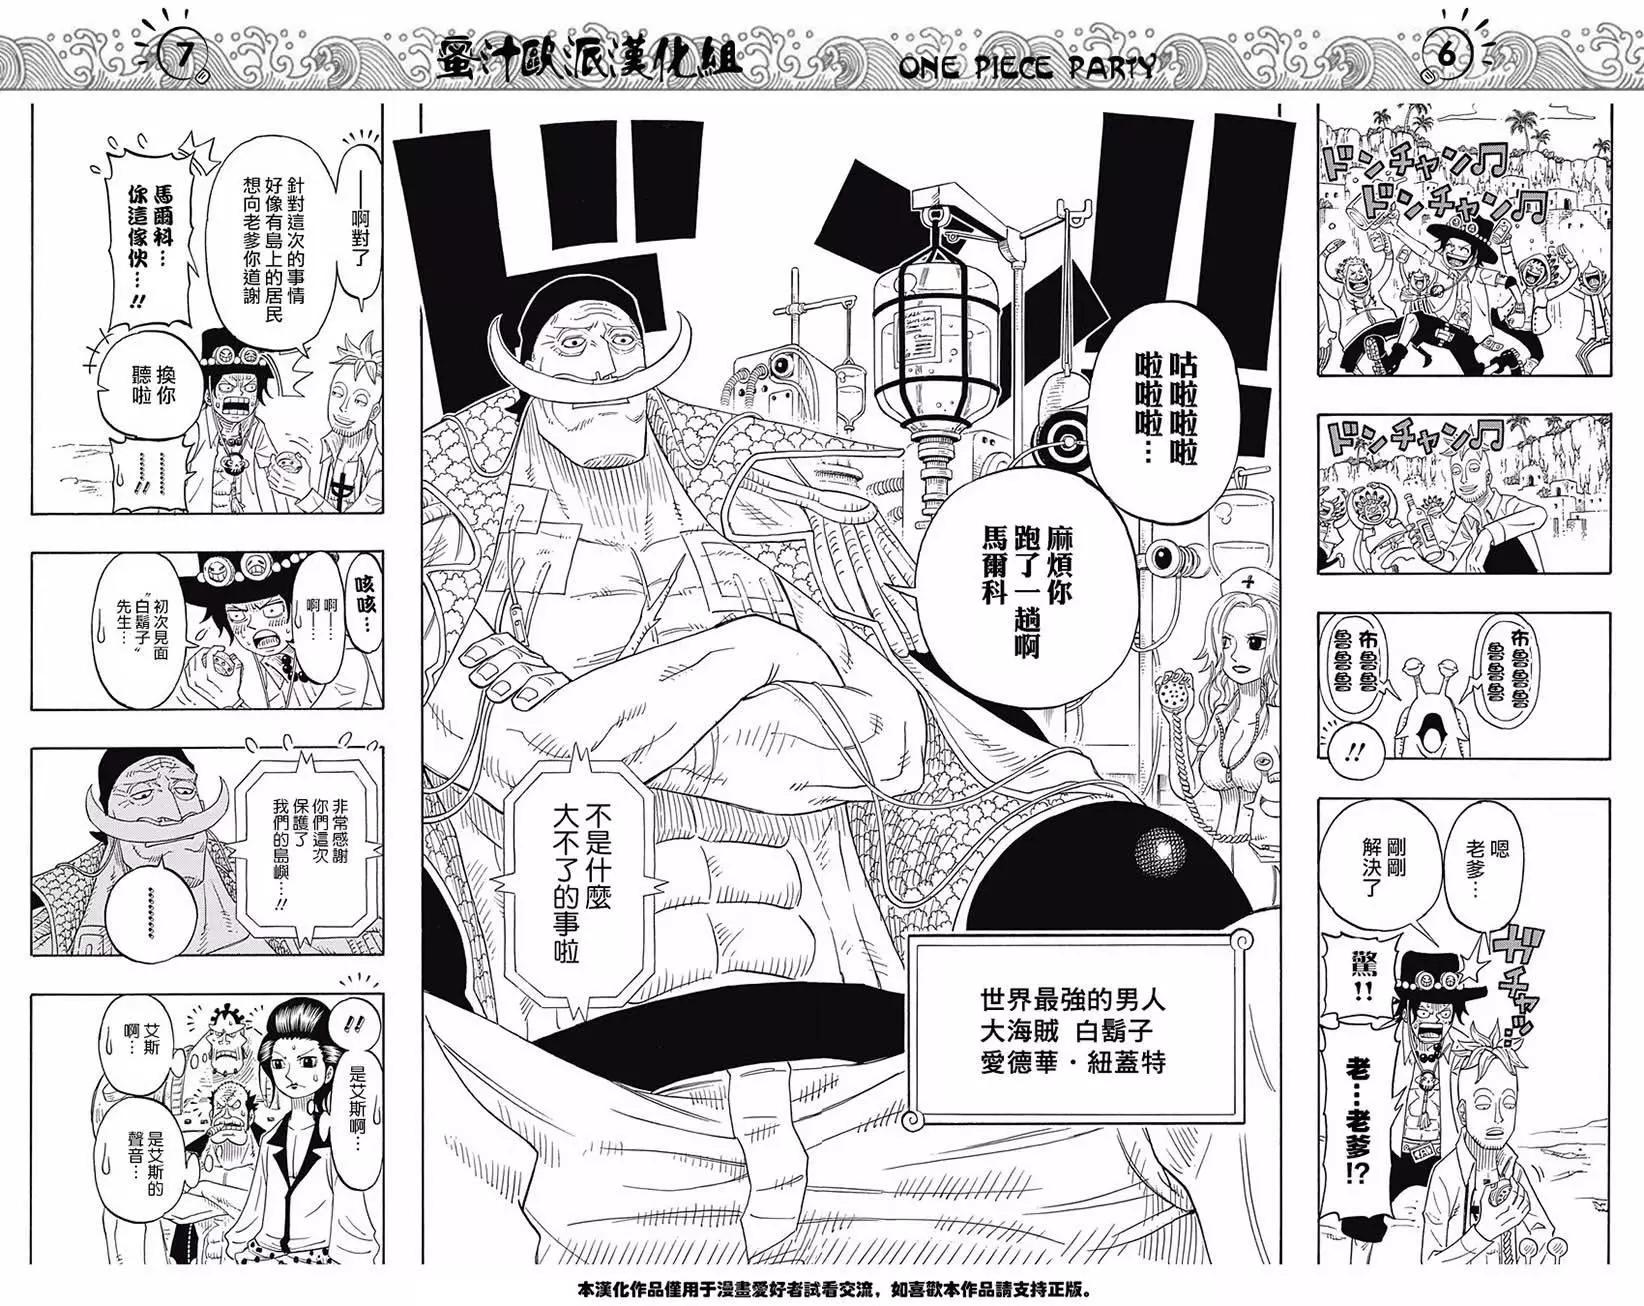 One piece party - 第08回 - 2